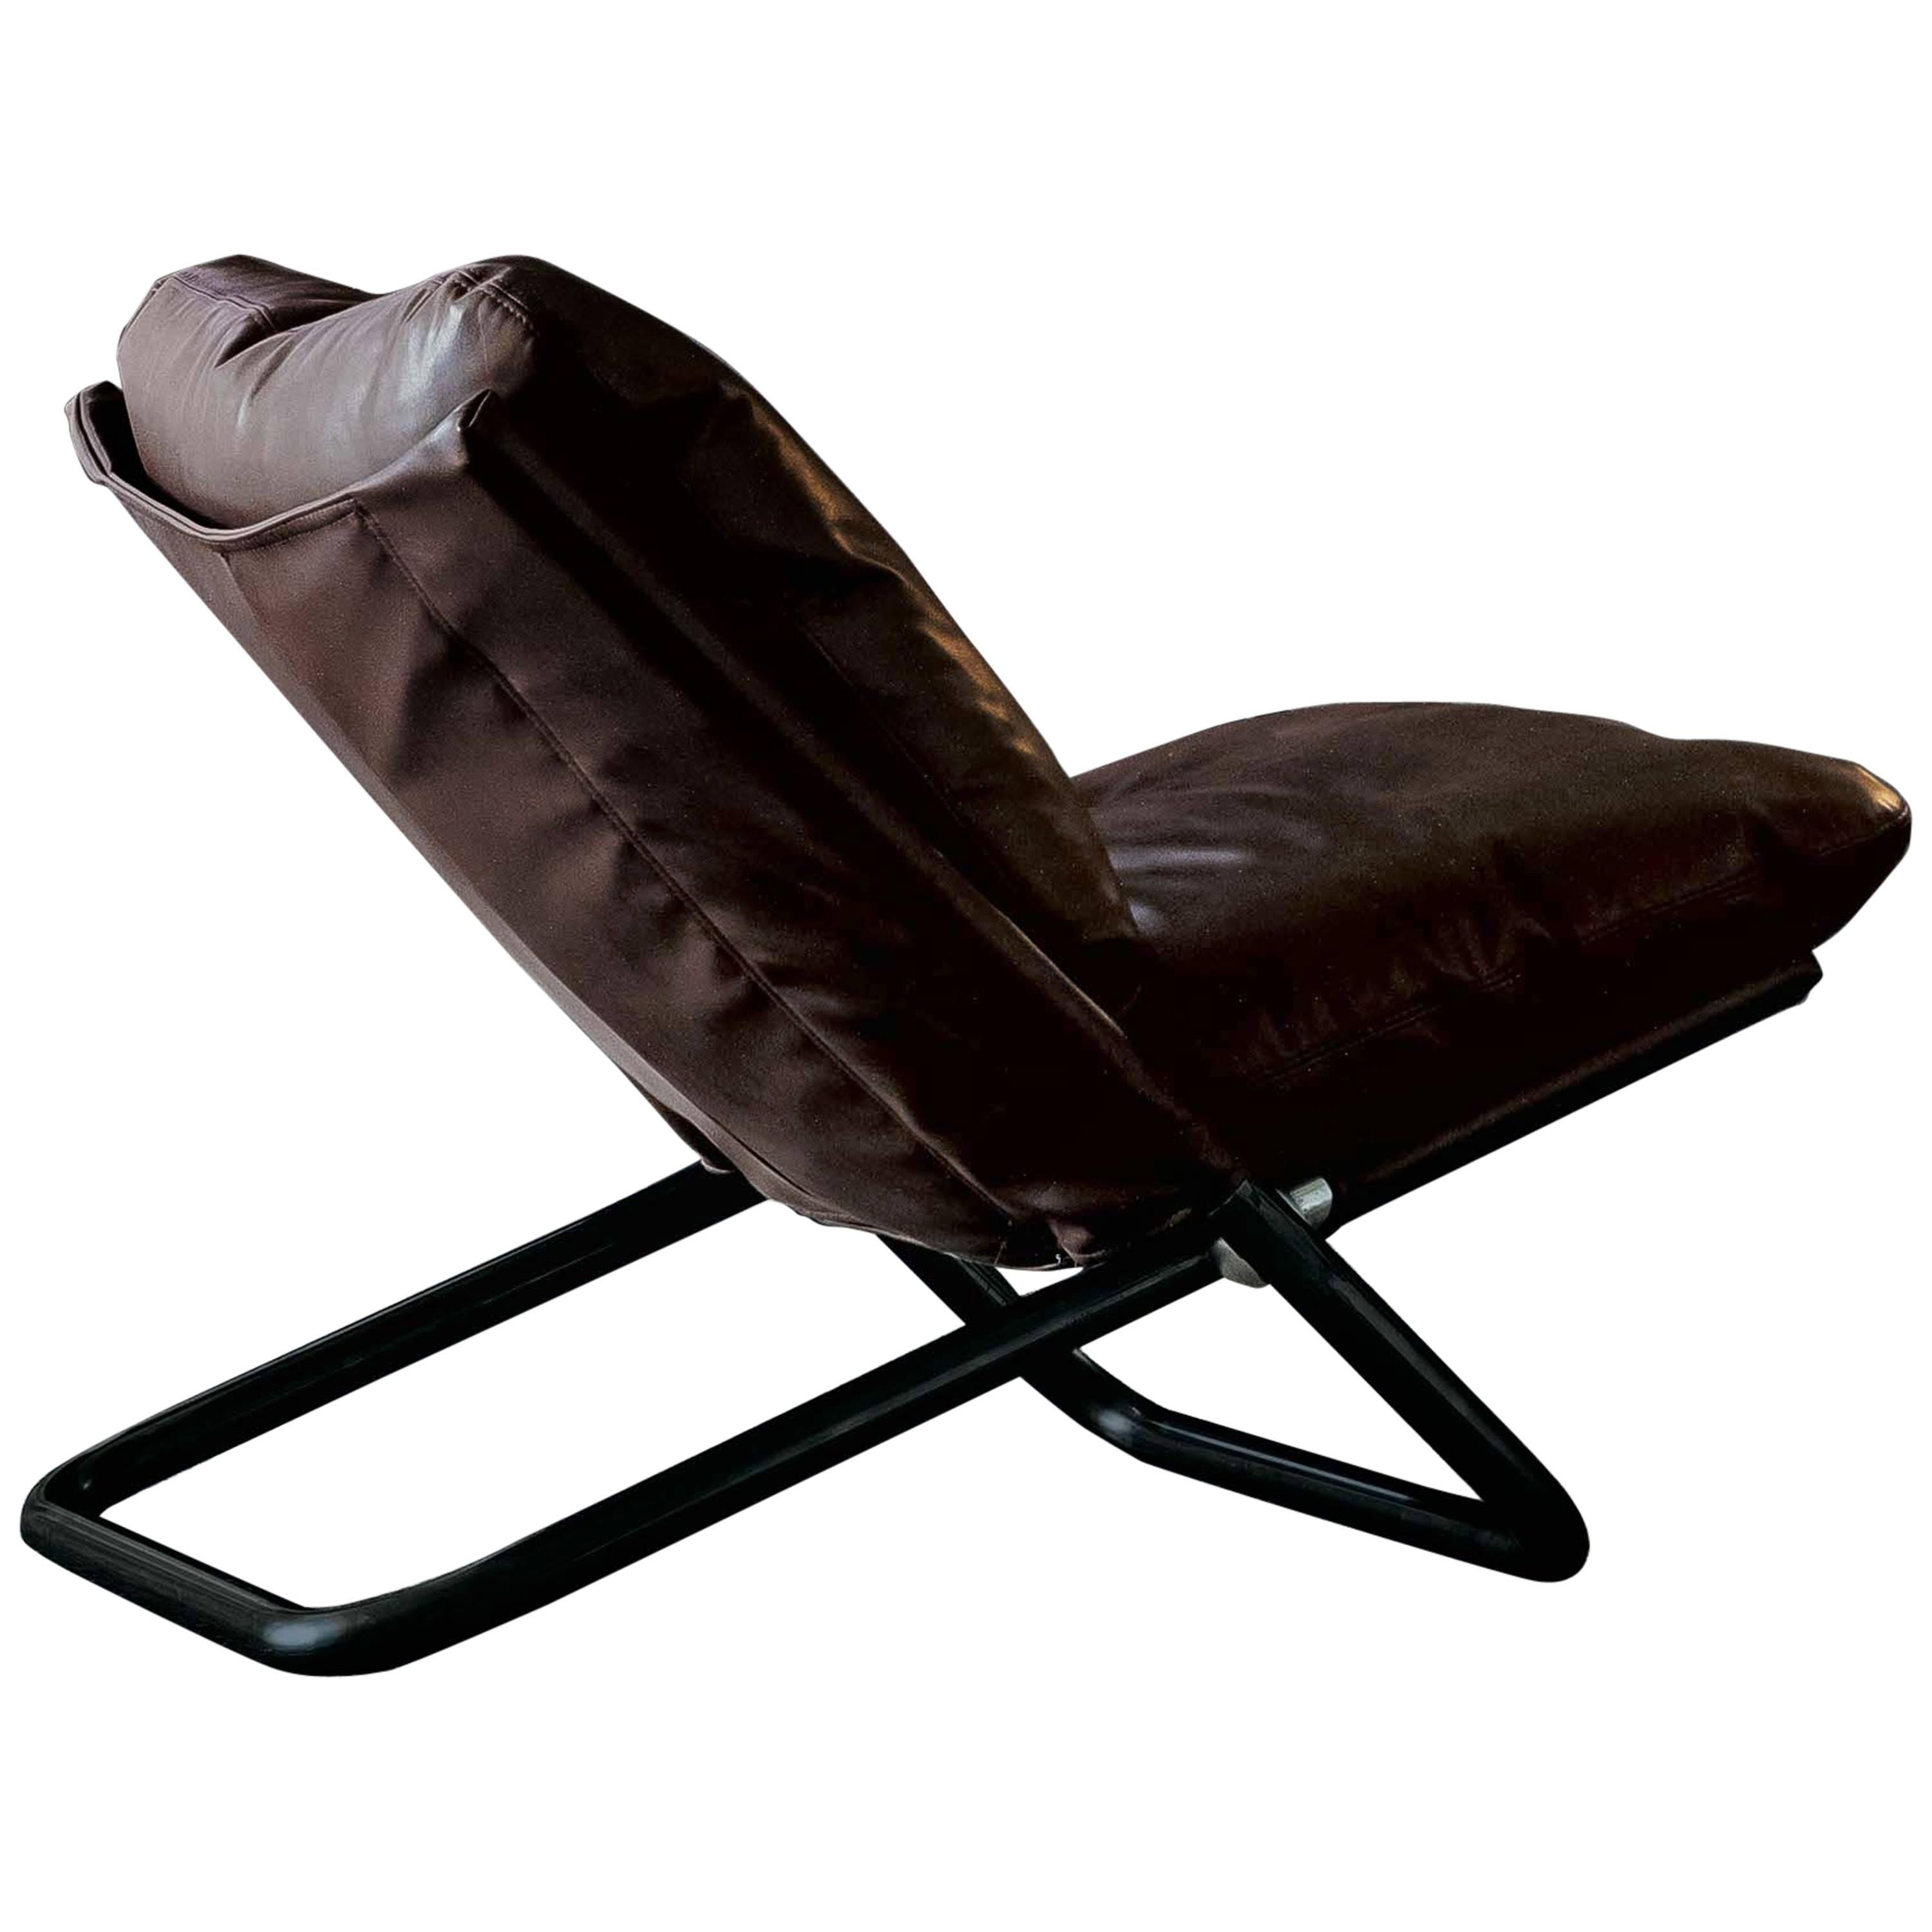 Arflex Cross Chair Low Version by Marcelle Cuneo For Sale